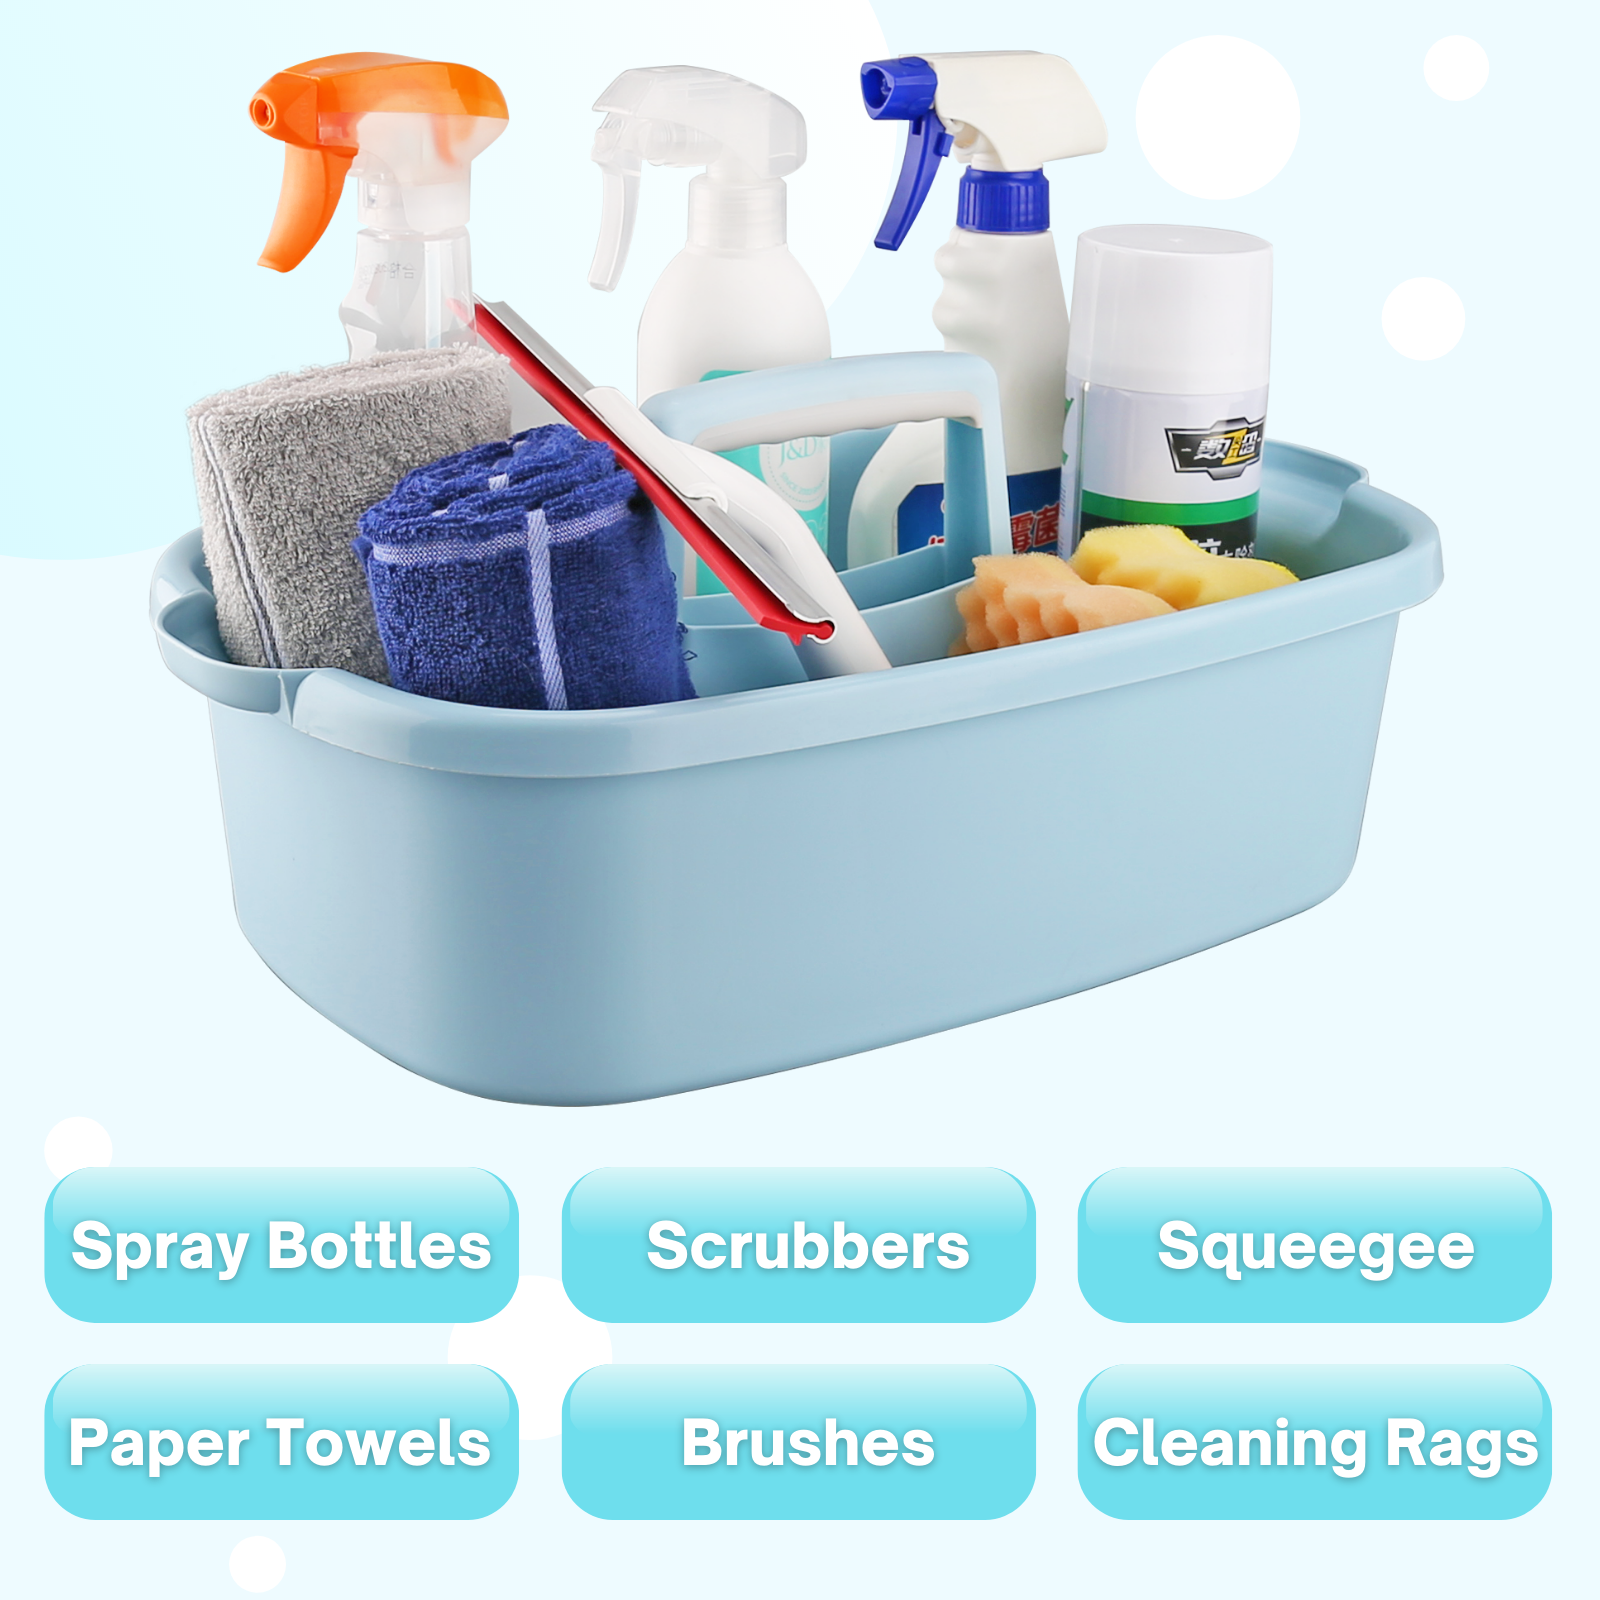 Where Do You Keep Cleaning Supplies? - Lemon Thistle